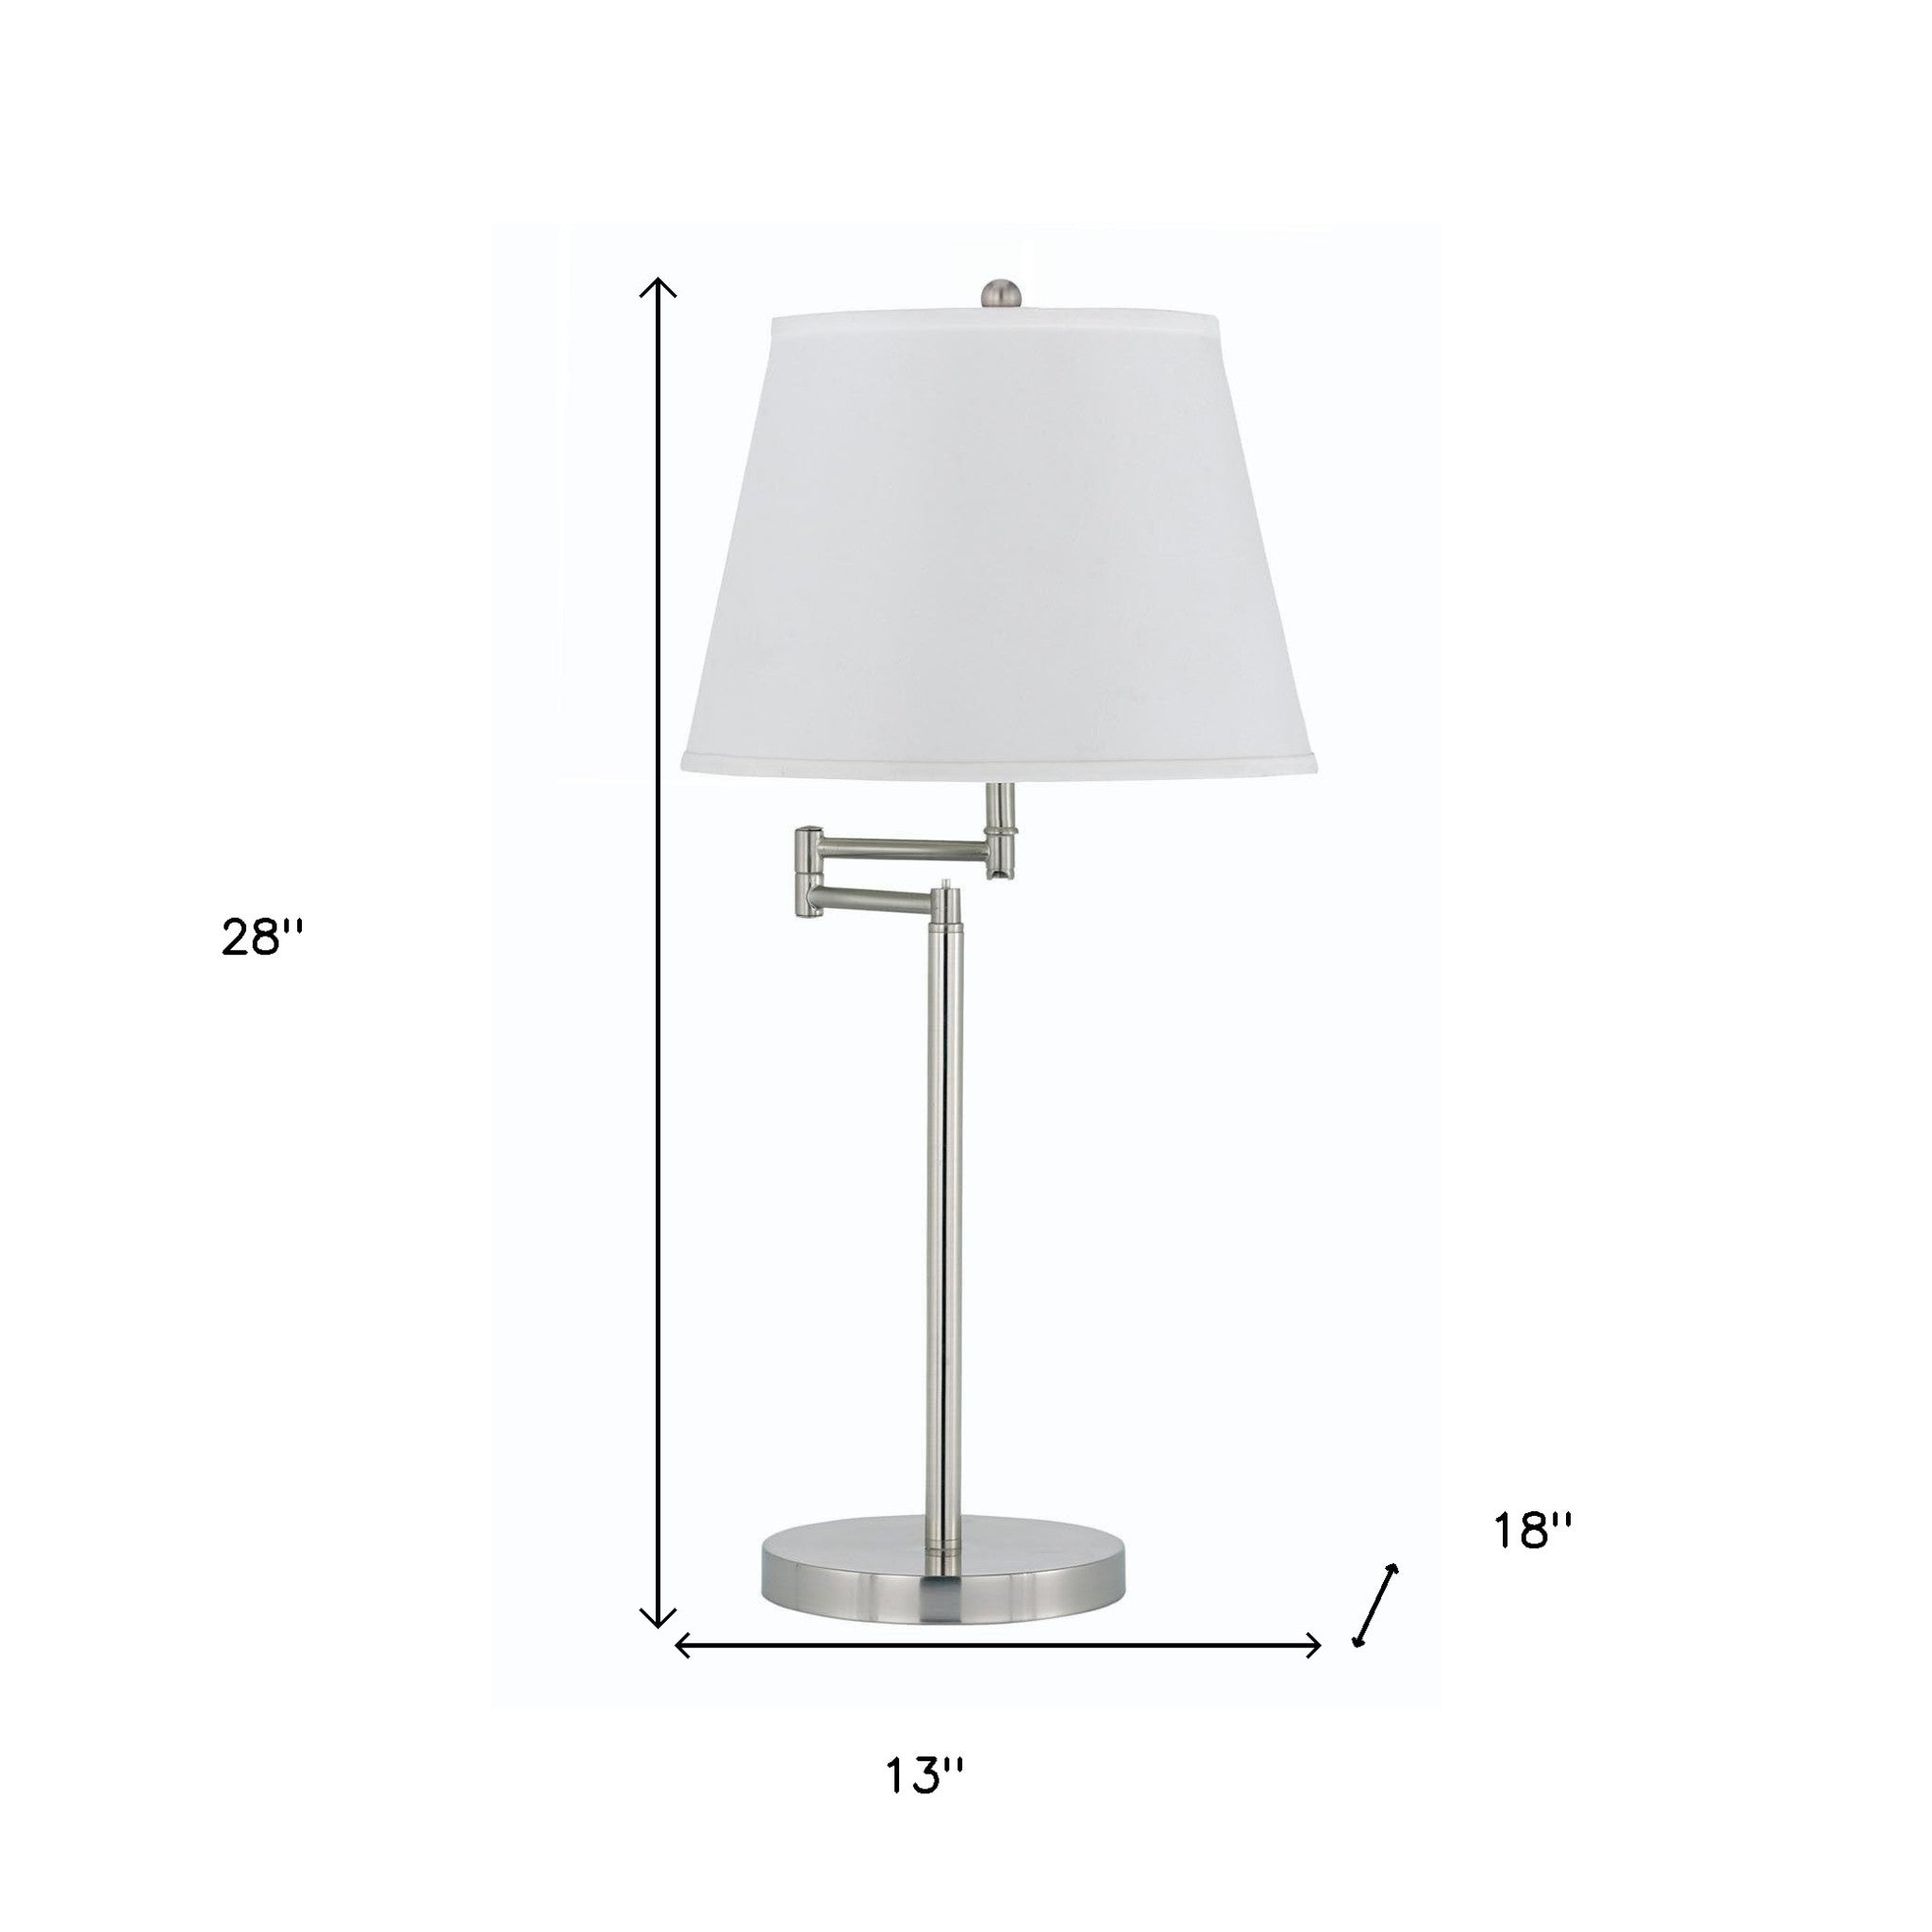 28" Nickel Metal Table Lamp With Off White Empire Shade